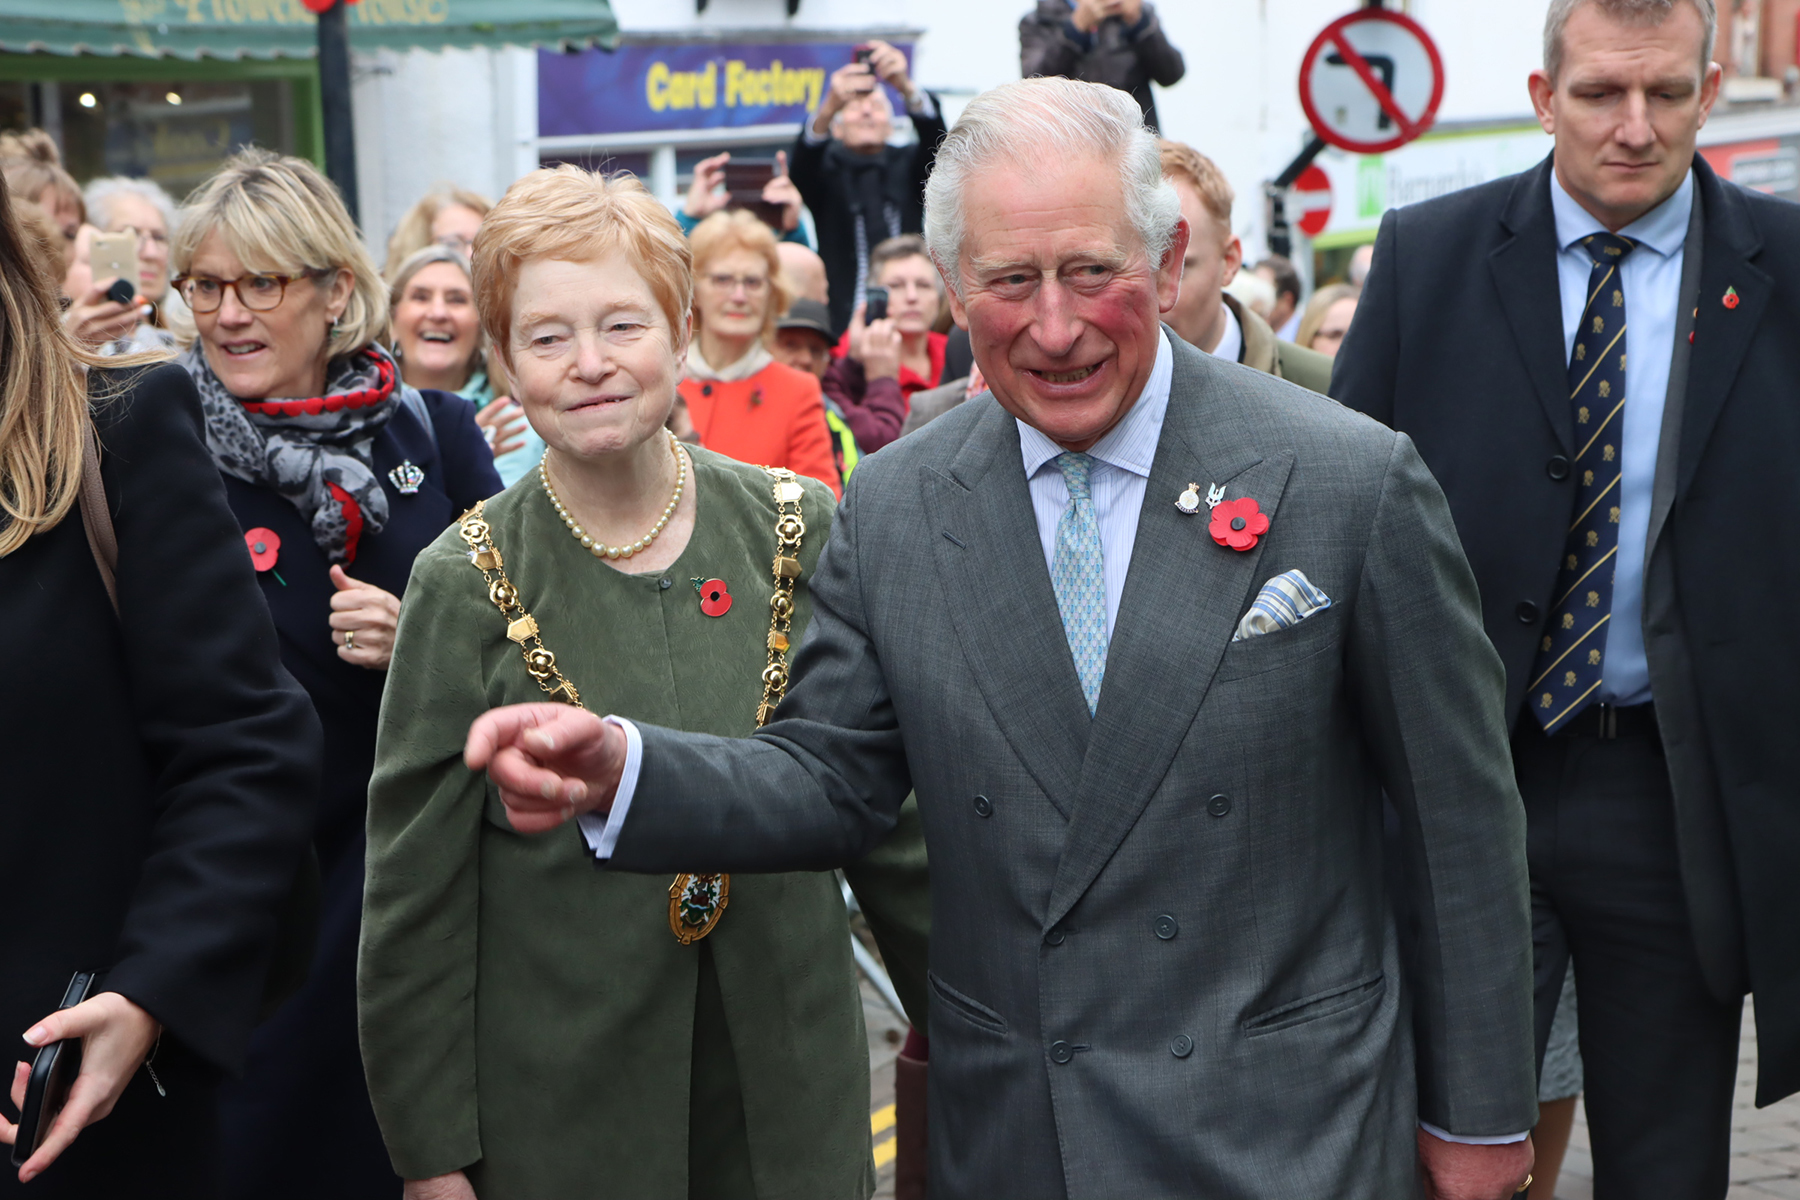 The Mayor of Ross, Jane Roberts, accompanied Prince Charles on his visit to Ross-on-Wye